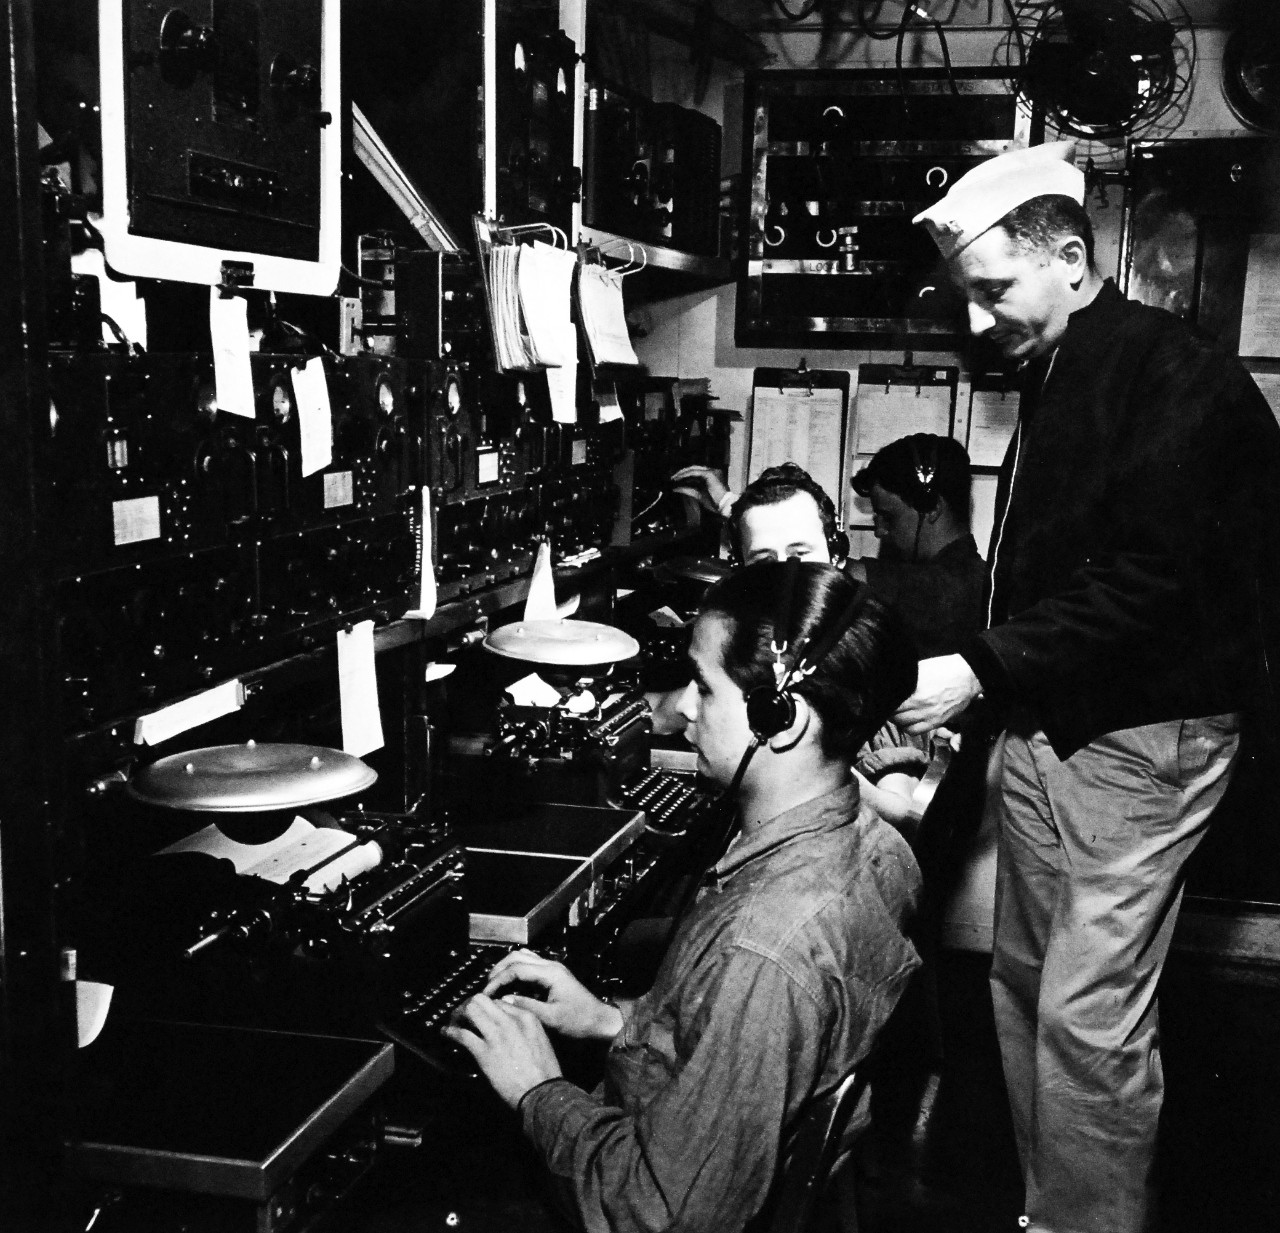 80-G-475697:  Aleutian Islands Campaign, June 1942 - August 1943.  Battle of Attu, May 11-29, 1943.  Communications headquarters aboard USS Casco (AVP-12) in Massacre Bay, Attu. Photographed released by the Steichen Photographic Unit:  Lieutenant Commander Horace Bristol, July 1943.    TR-5263.    U.S. Navy photograph, now in the collections of the National Archives.  (2015/11/17).